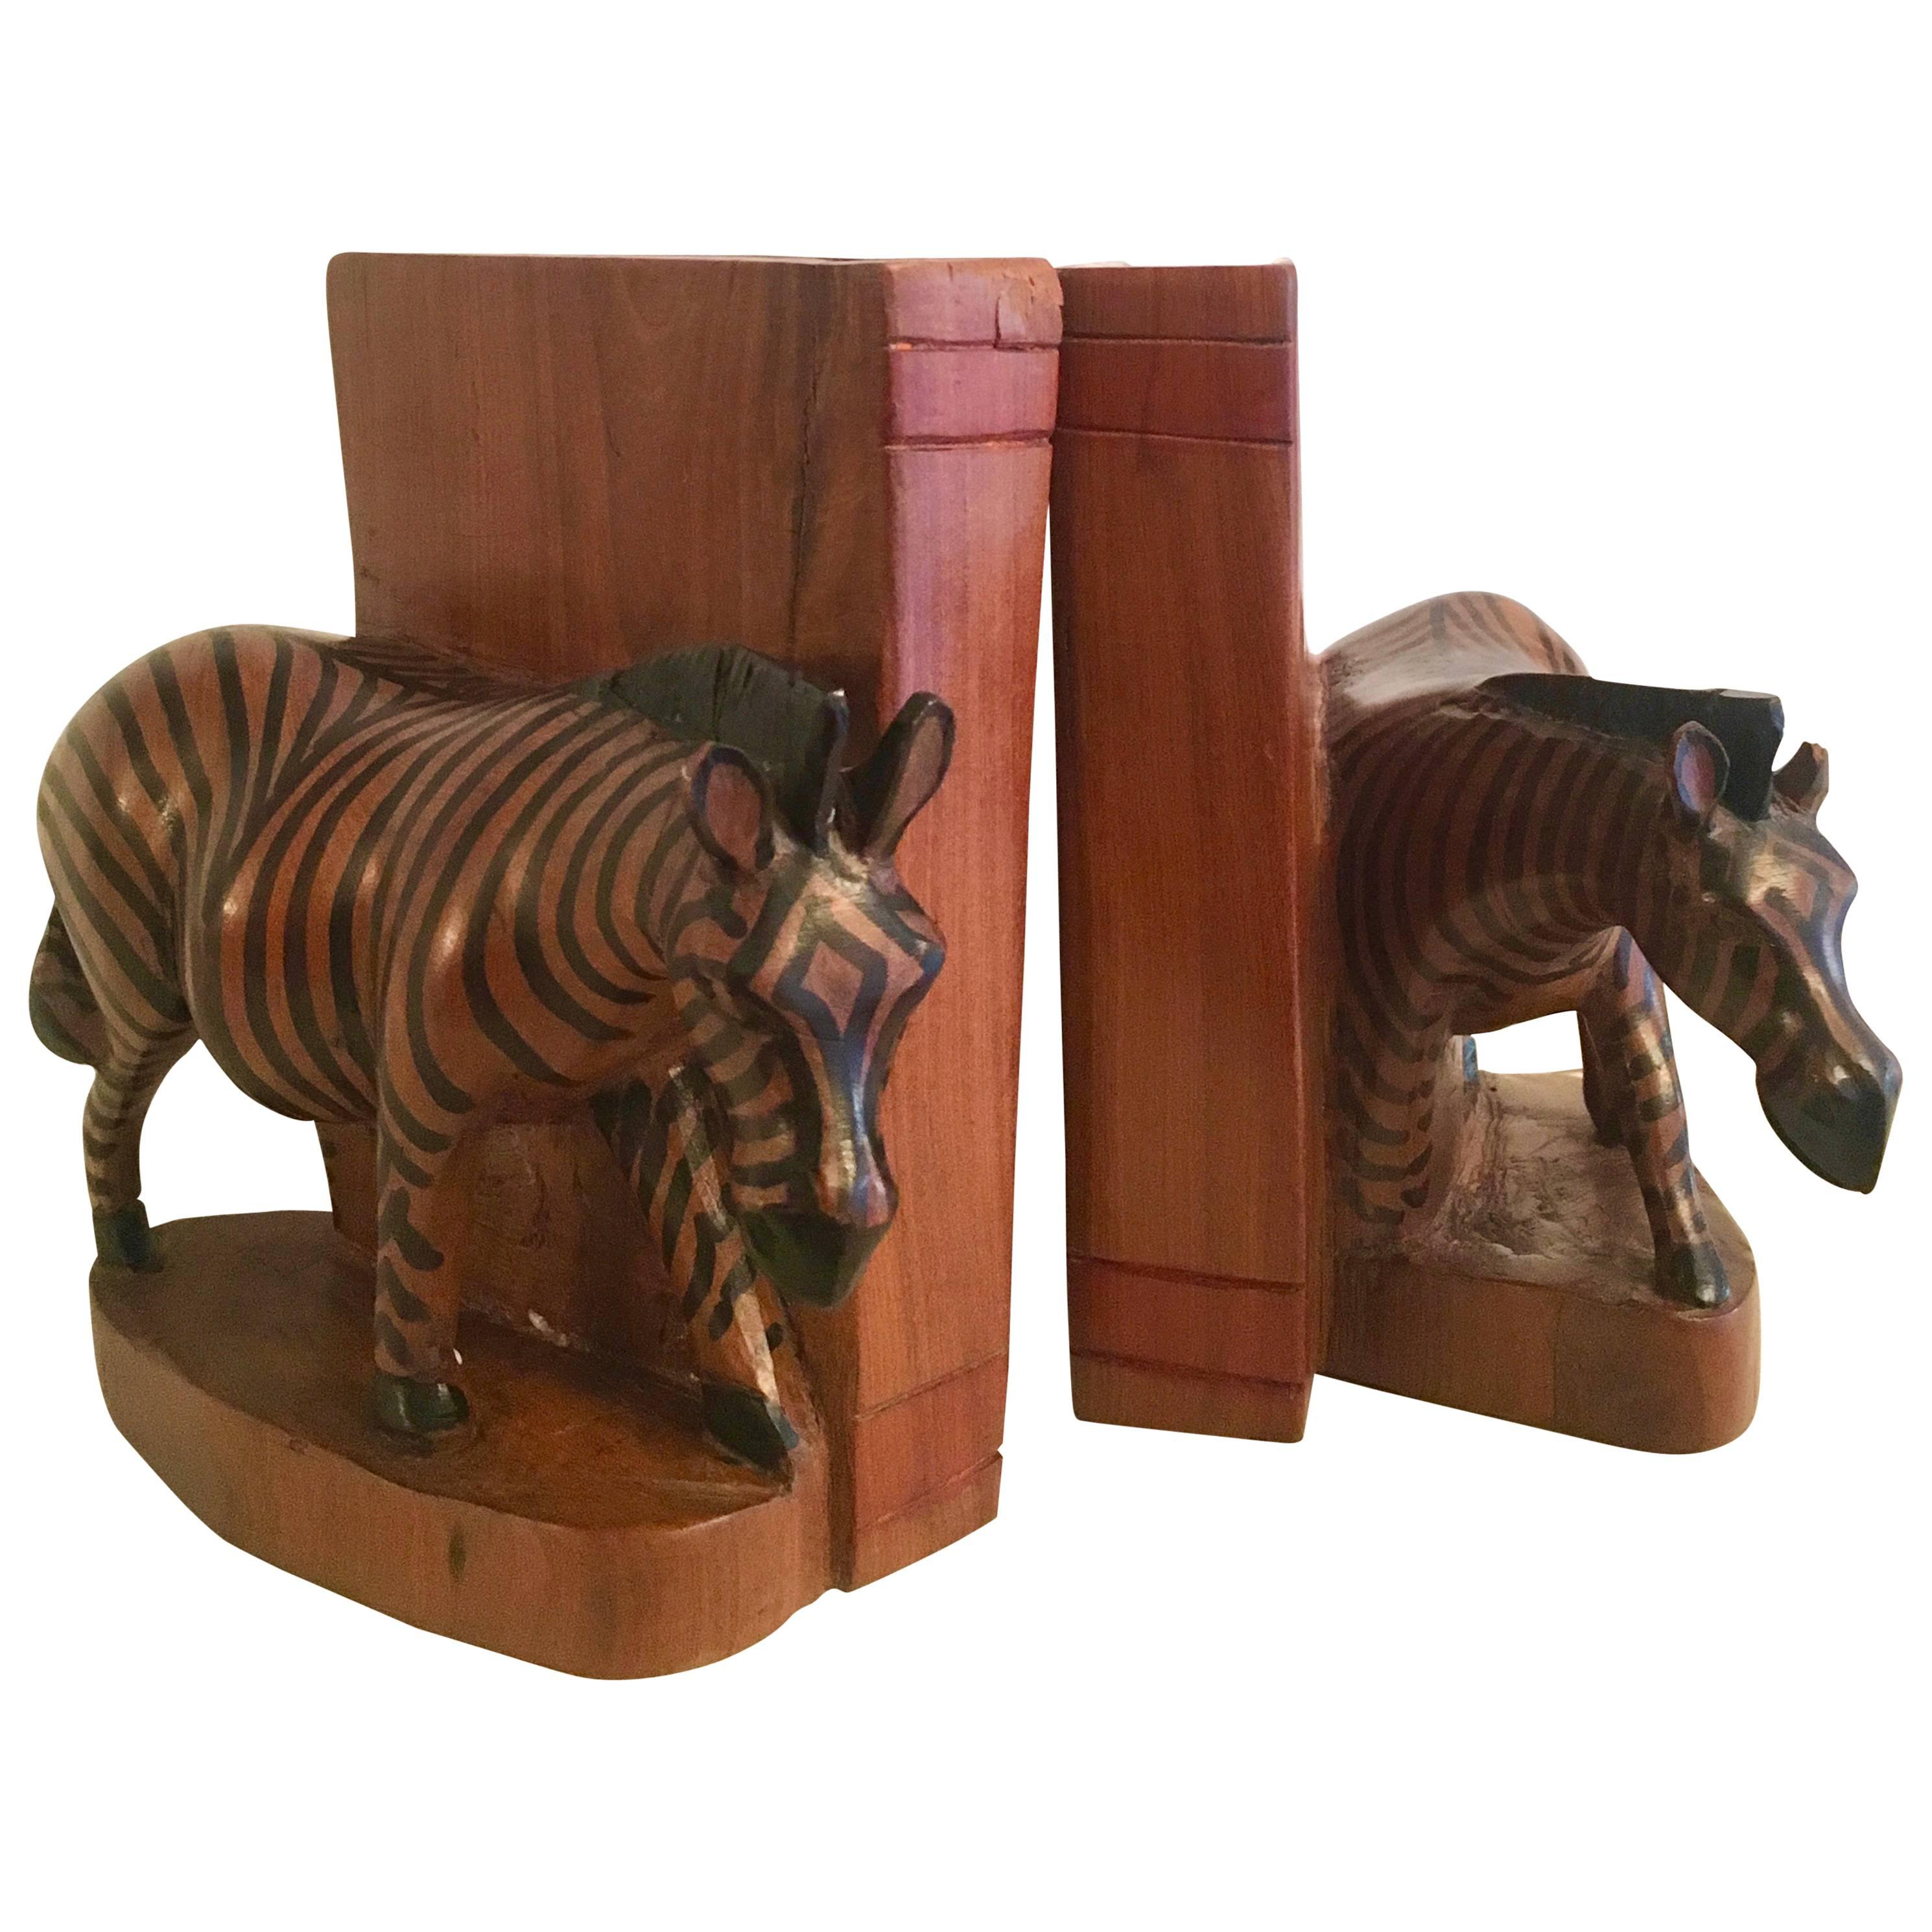 Pair of Hand-Carved Zebra Bookends from Kenya